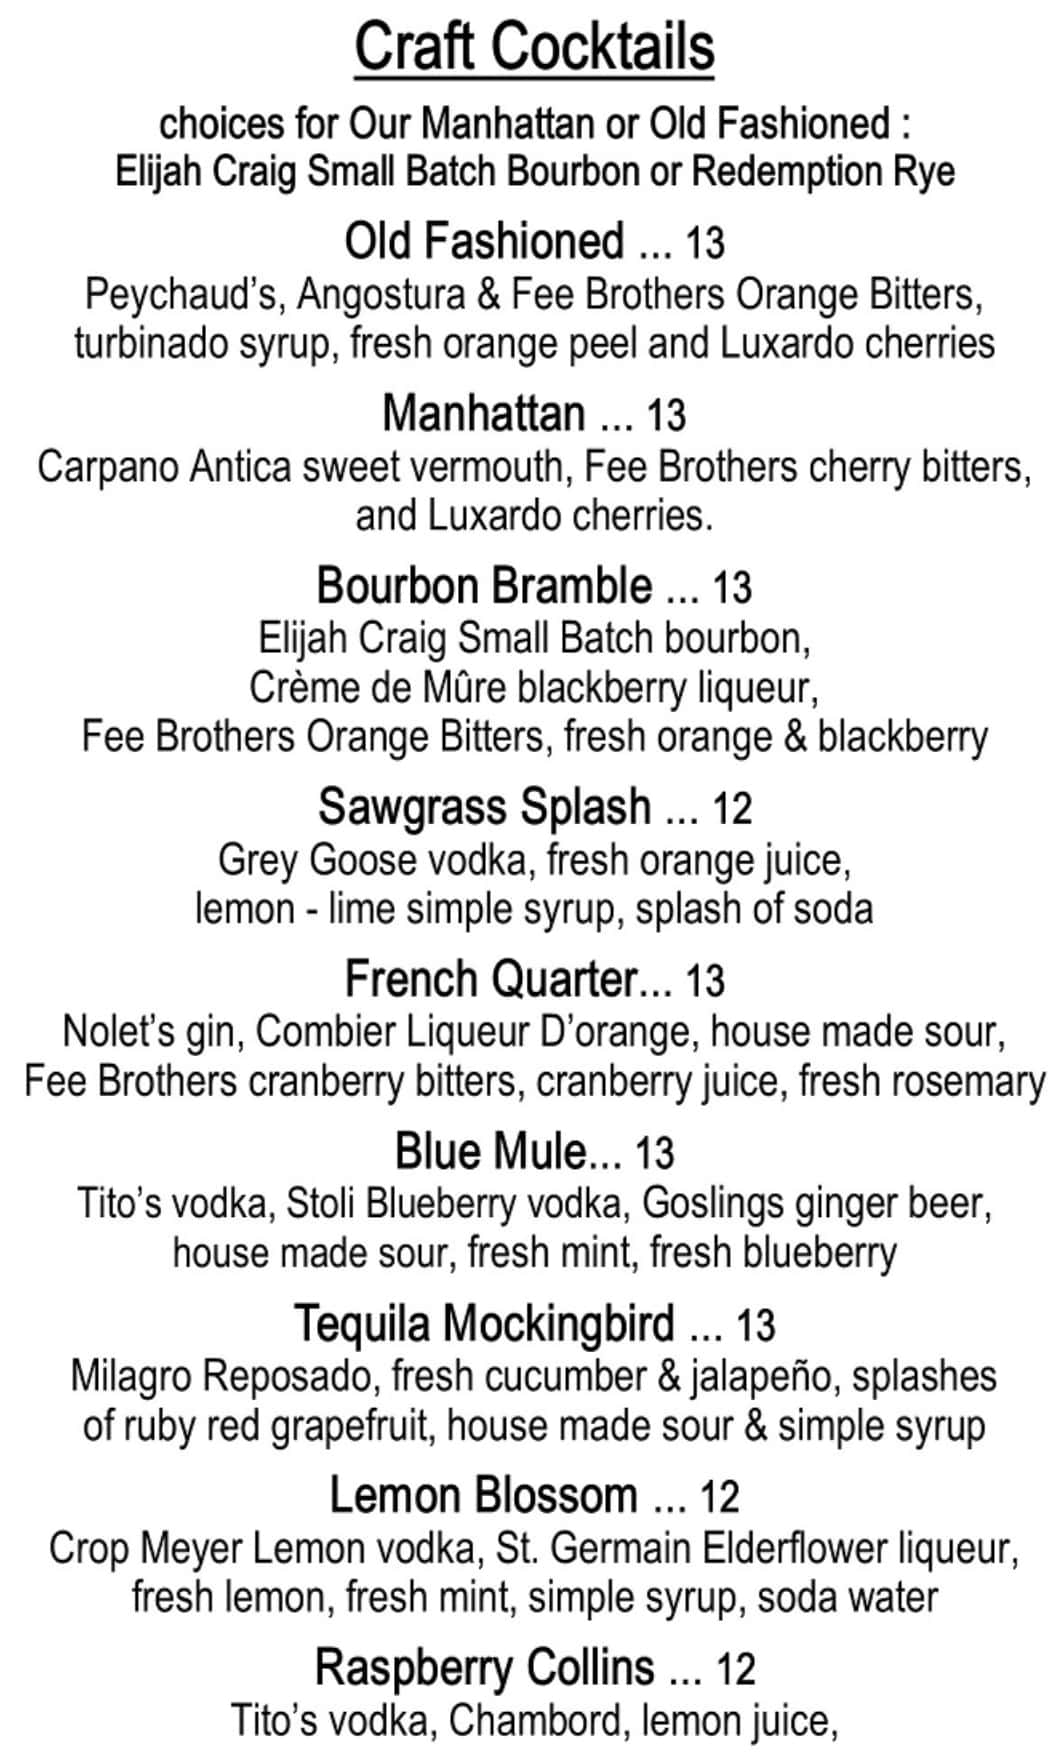 Eleven South Craft Cocktails and Beer Menu